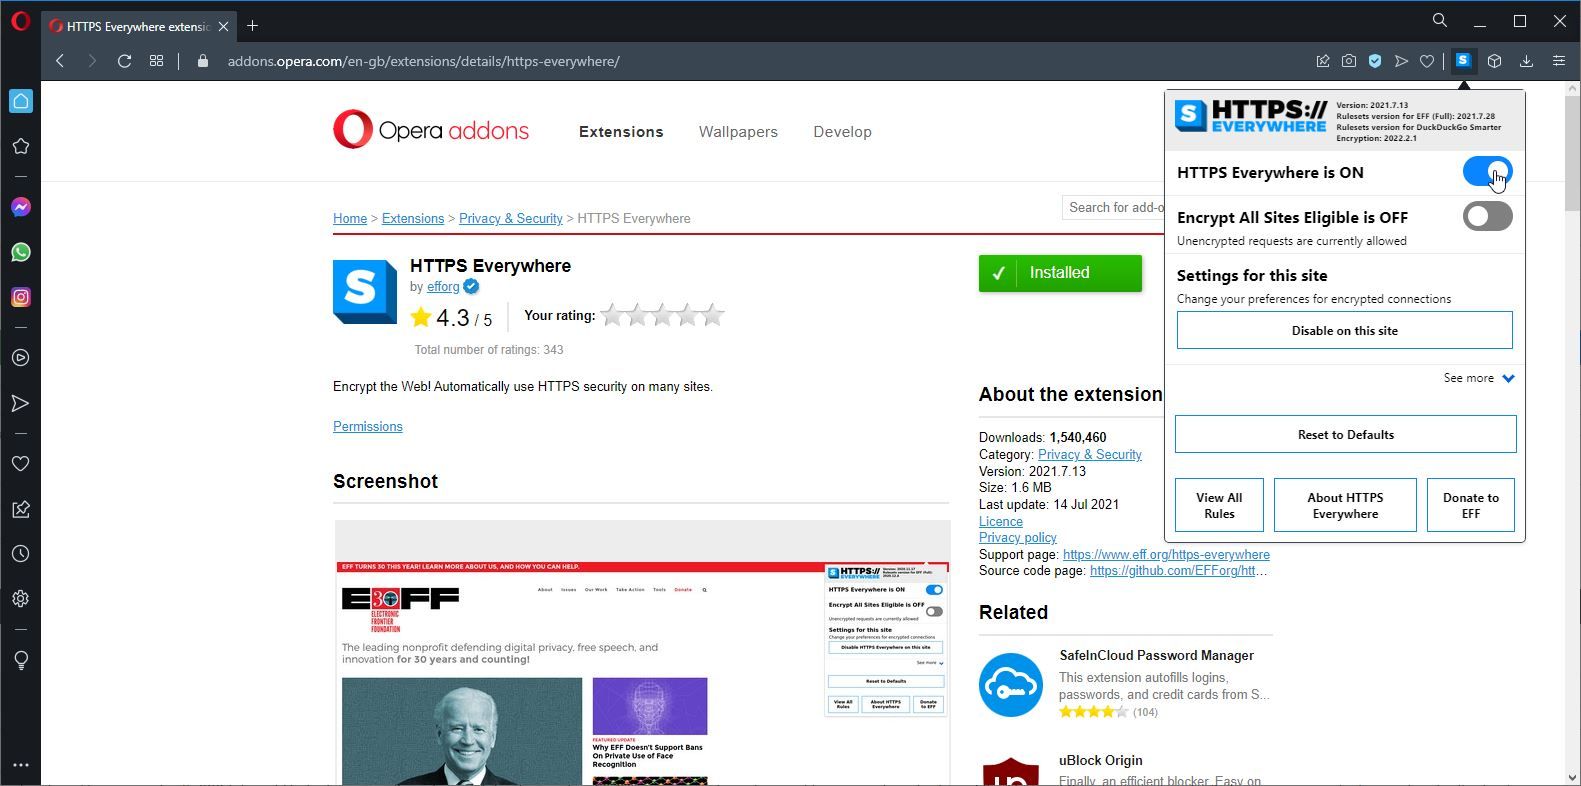 A Screenshot of the HTTPS Everywhere Add-On in Use